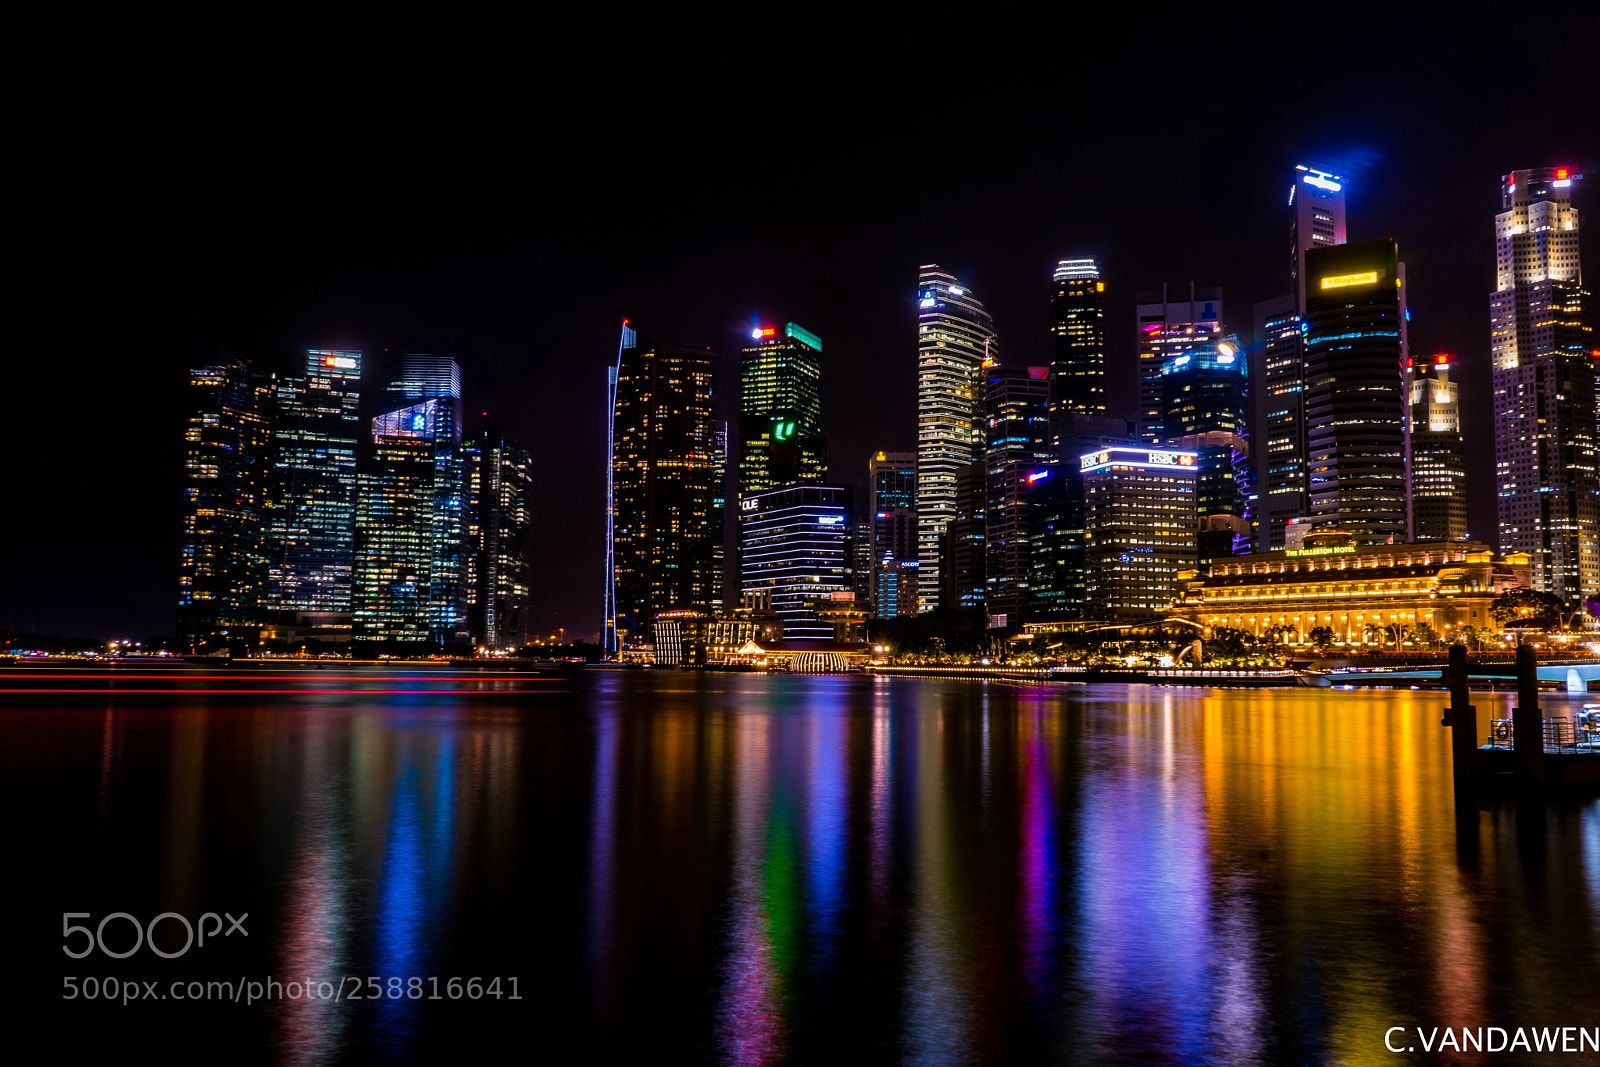 Sony a7 sample photo. Singapore at night photography